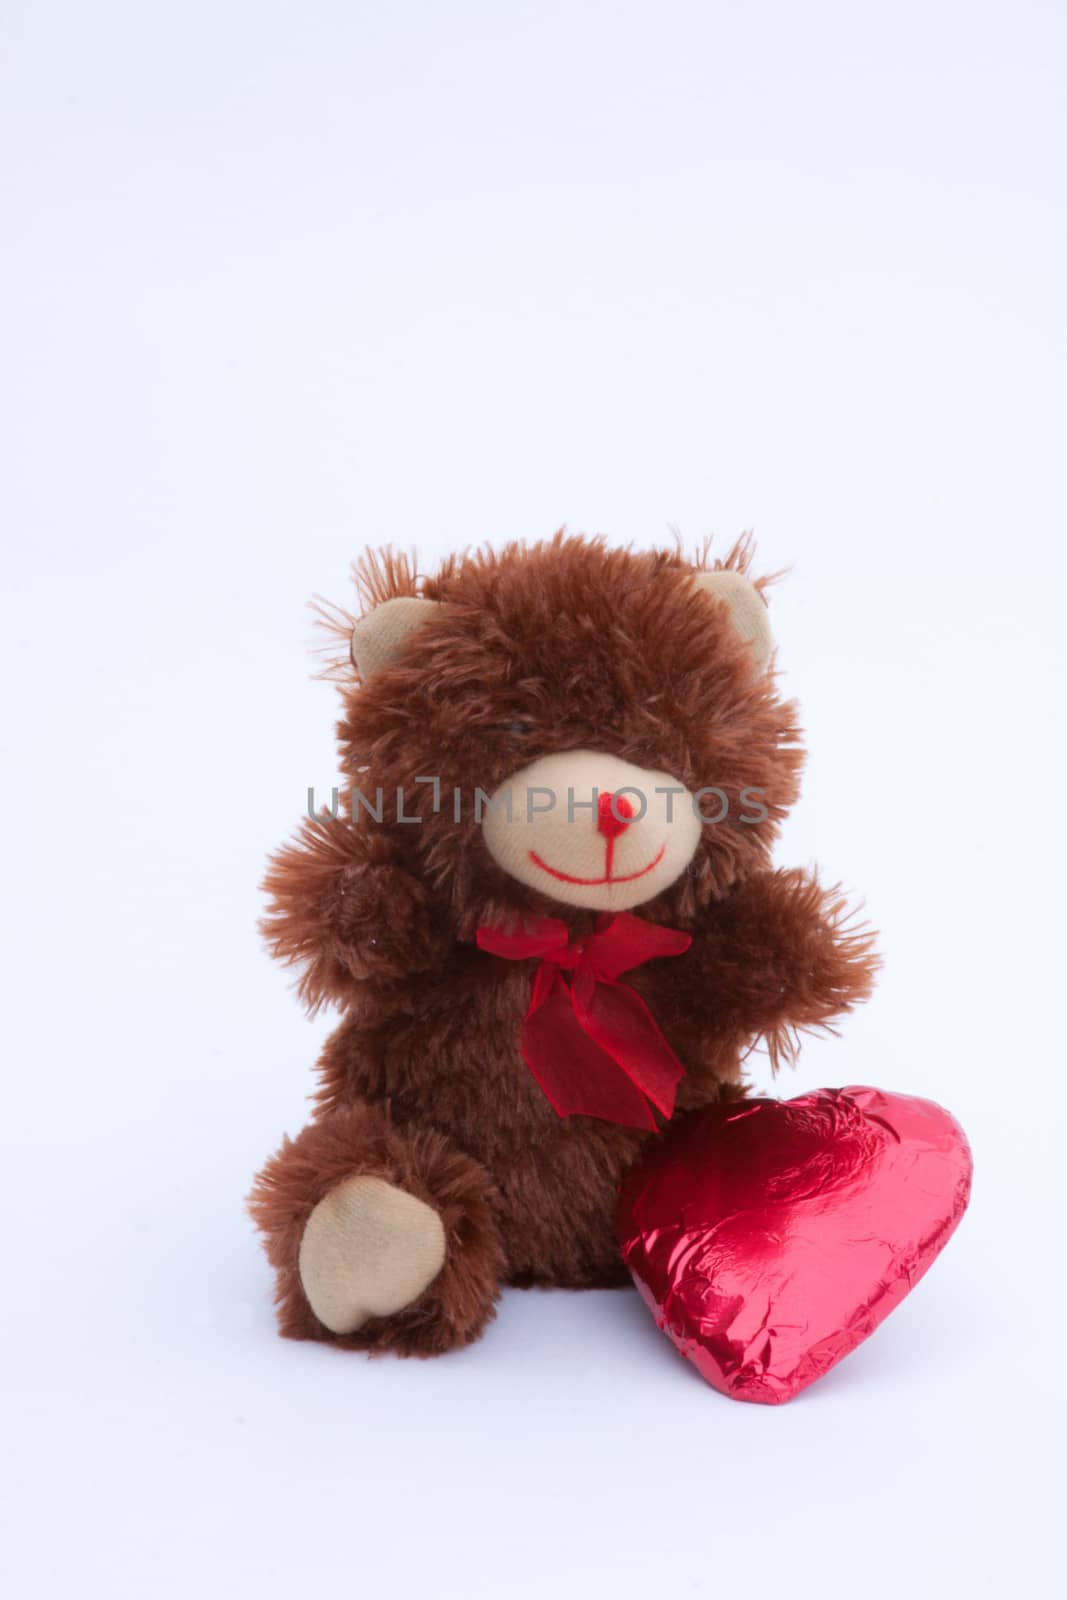 A Valentine's Day Teddy Bear with a red covered chocolate heart.